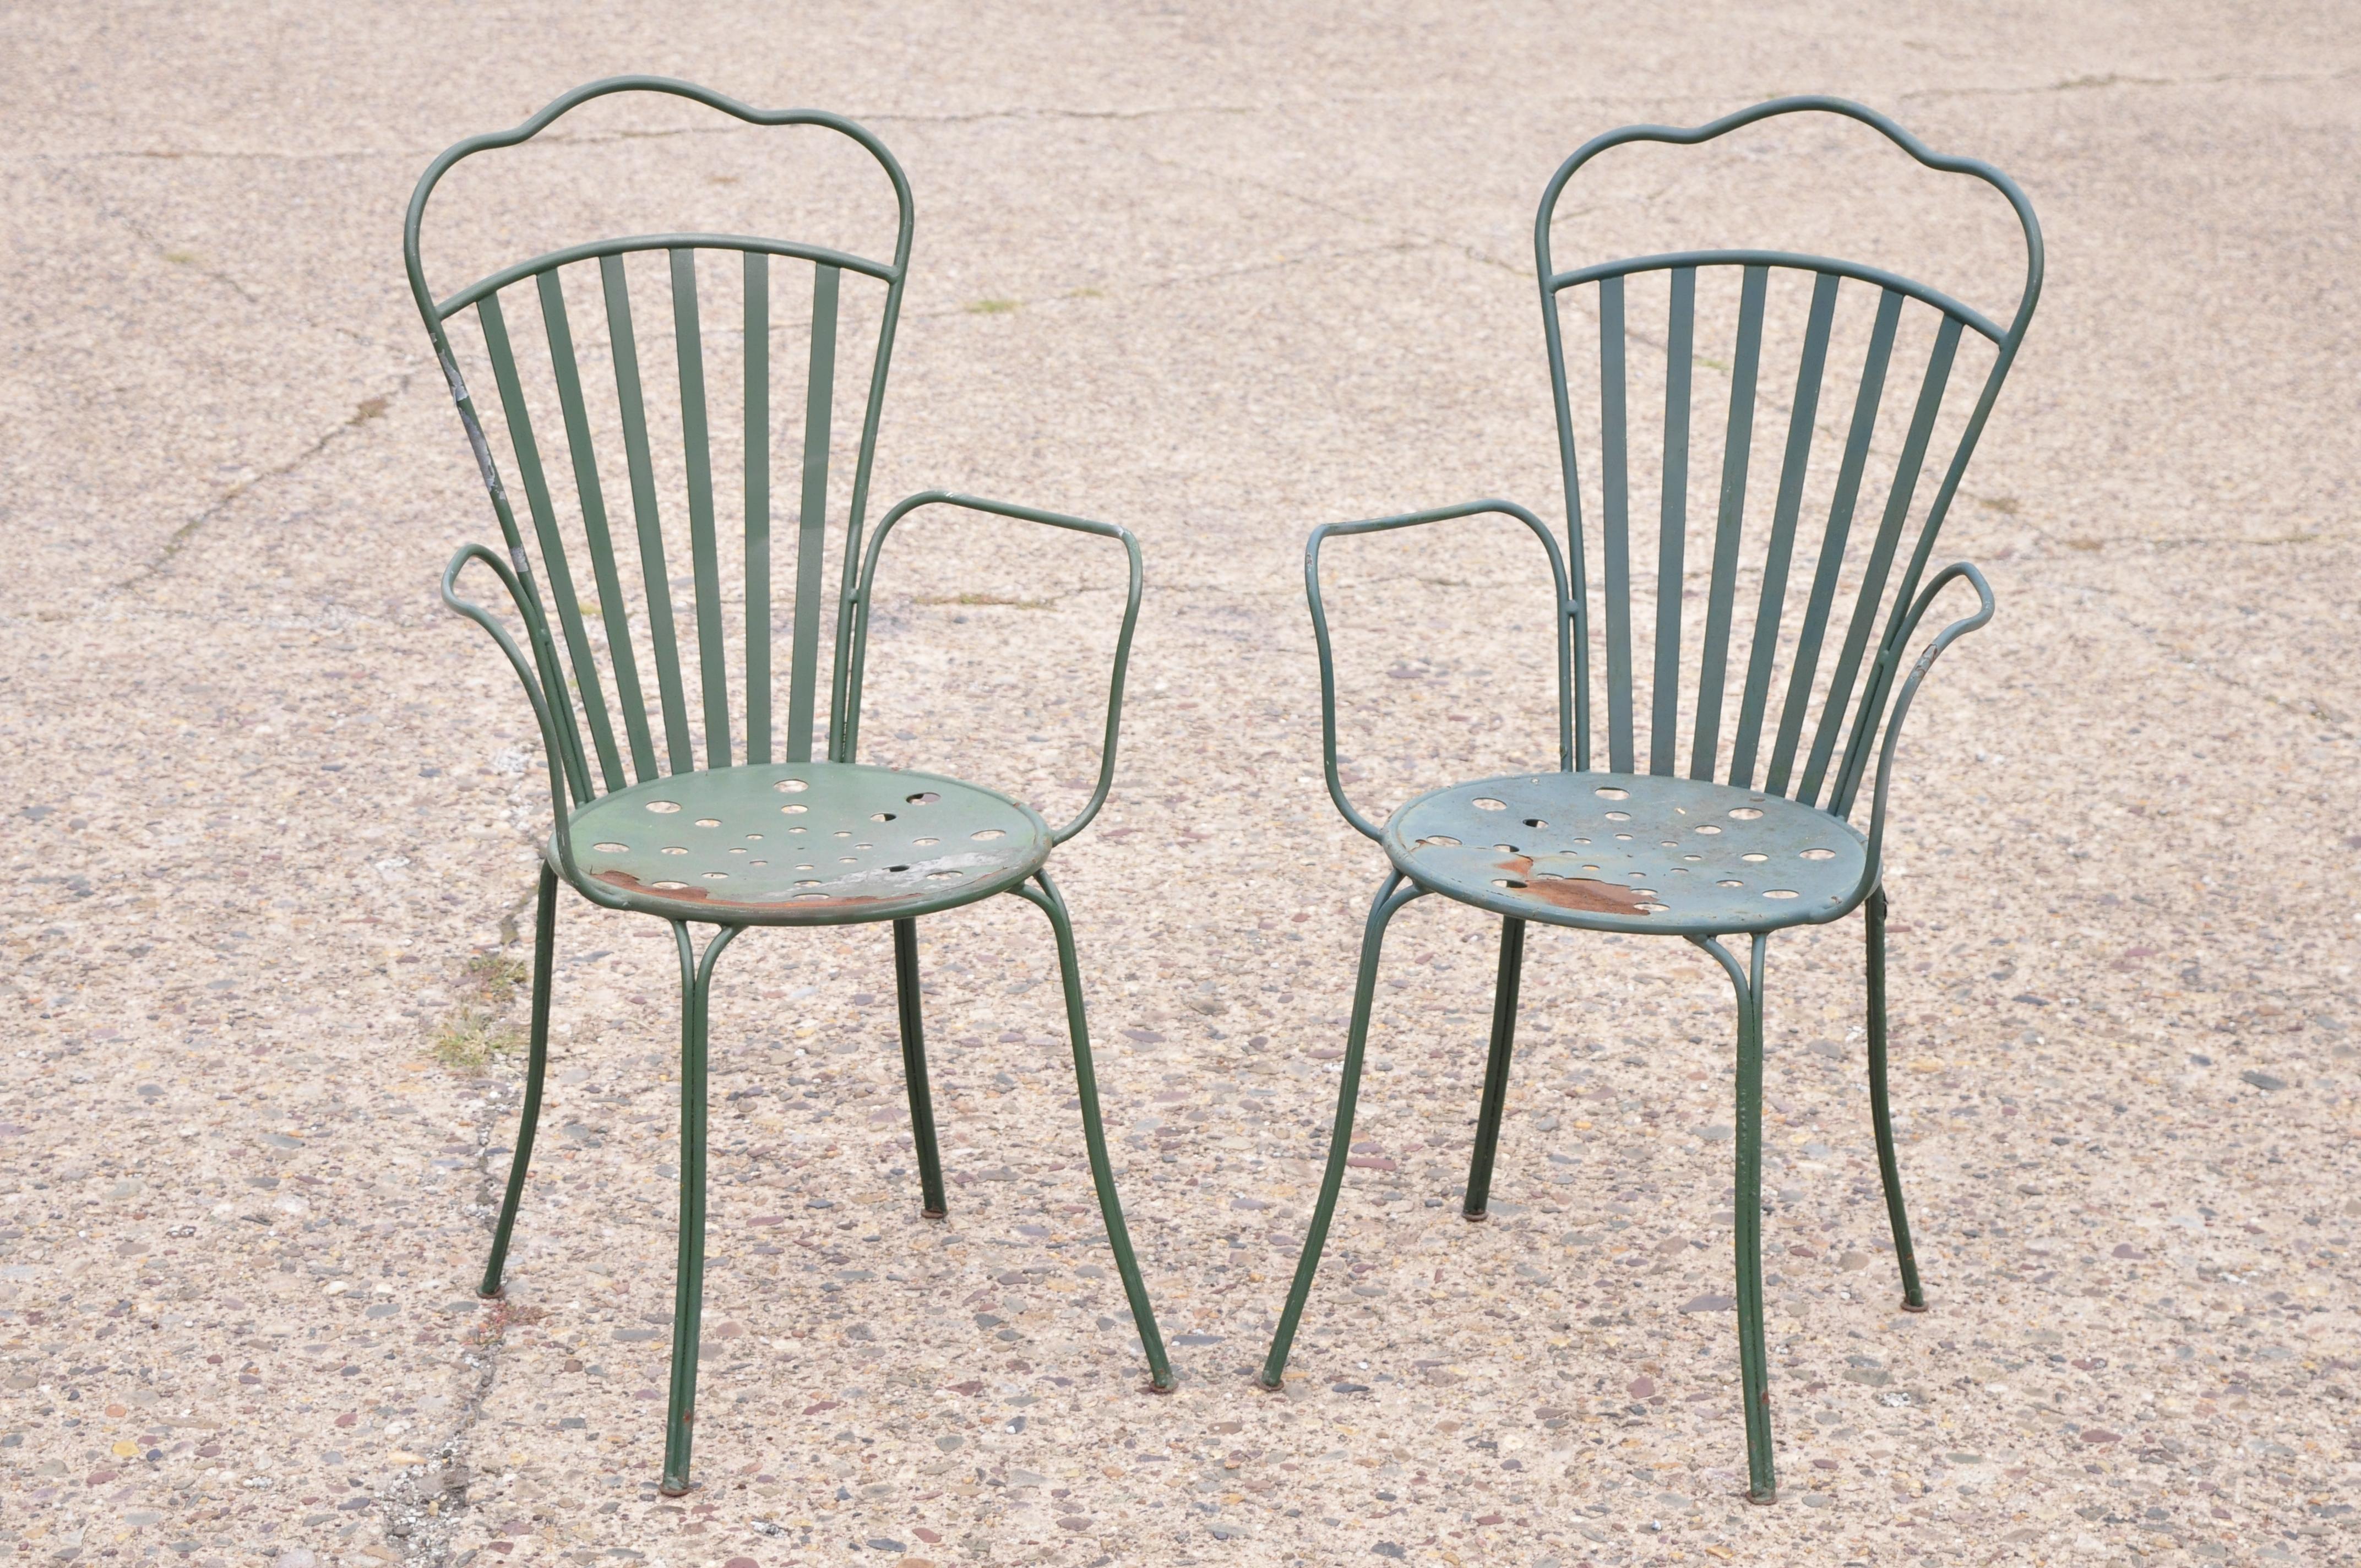 Vintage Mid-Century Modern wrought iron fan back garden patio dining chairs - Set of 4. Item features (4) armchairs, perforated seats, wrought iron construction, very nice vintage set, quality American craftsmanship, sleek sculptural form. Circa Mid